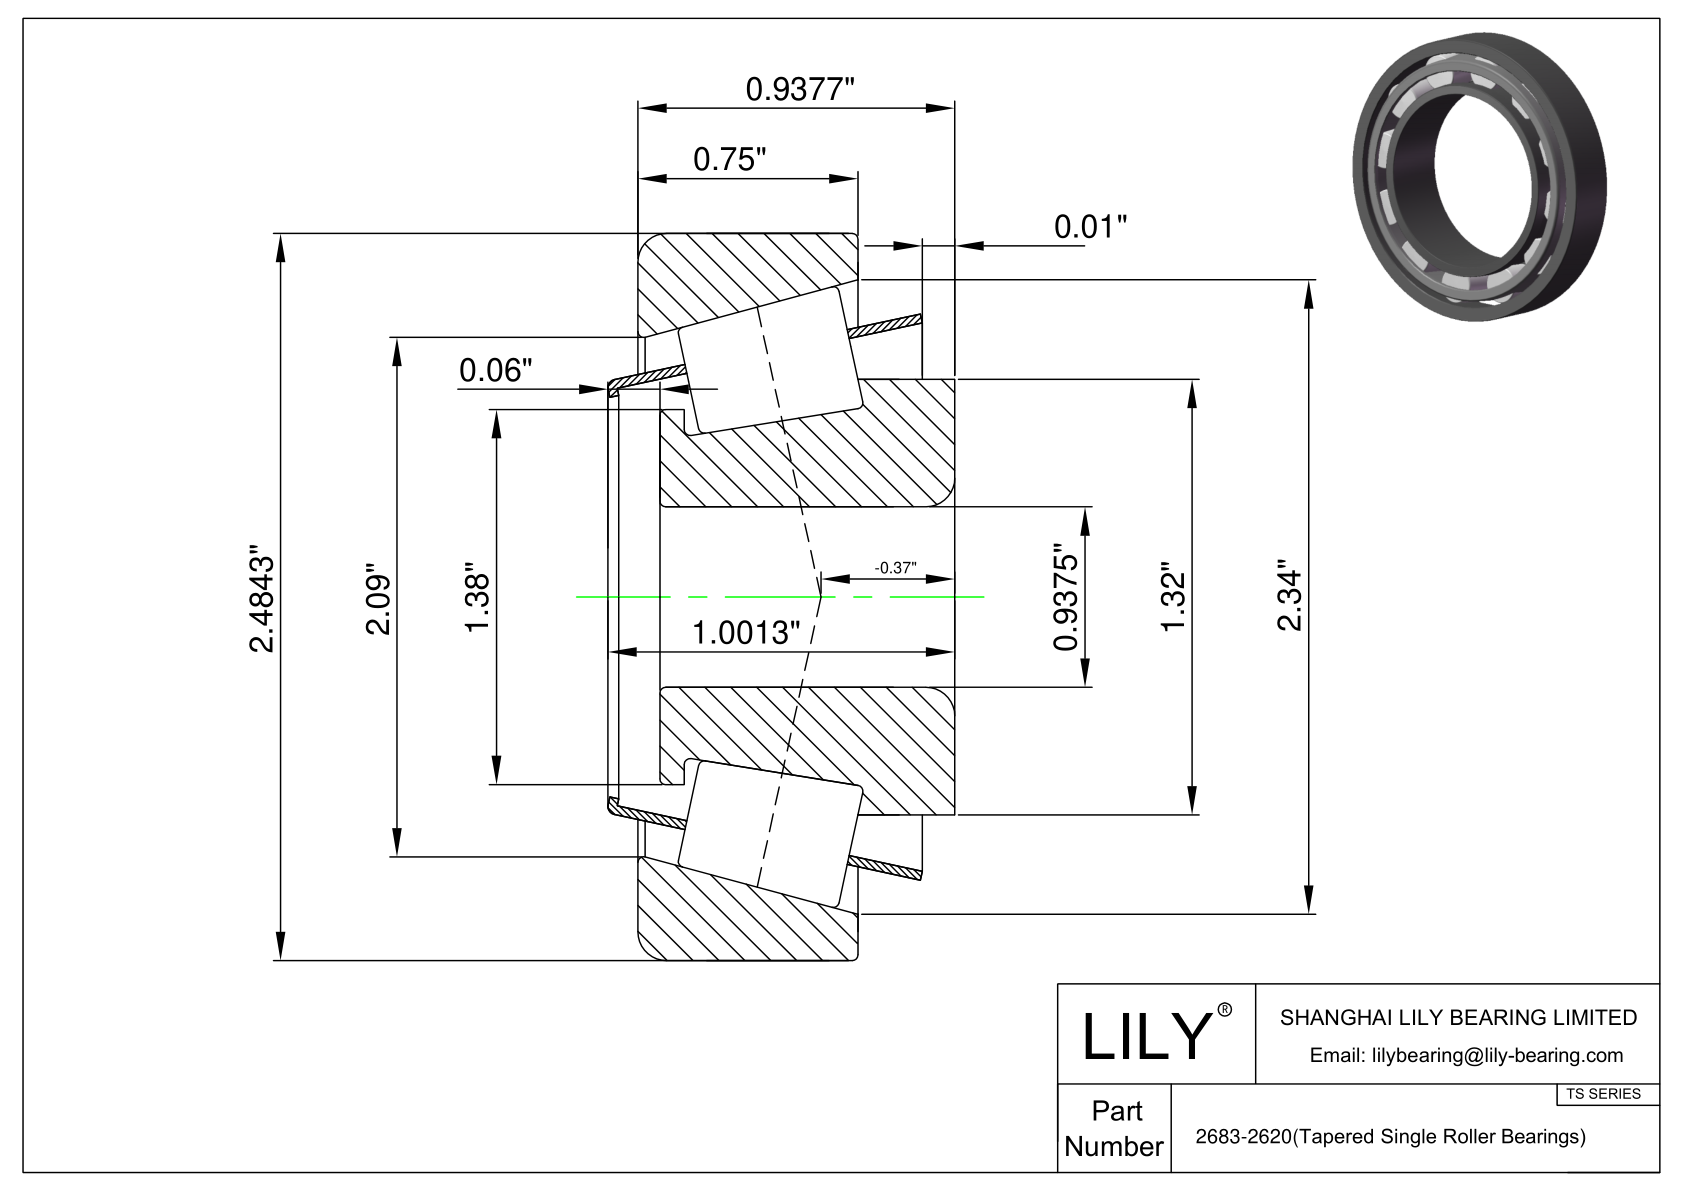 2683-2620 TS (Tapered Single Roller Bearings) (Imperial) cad drawing